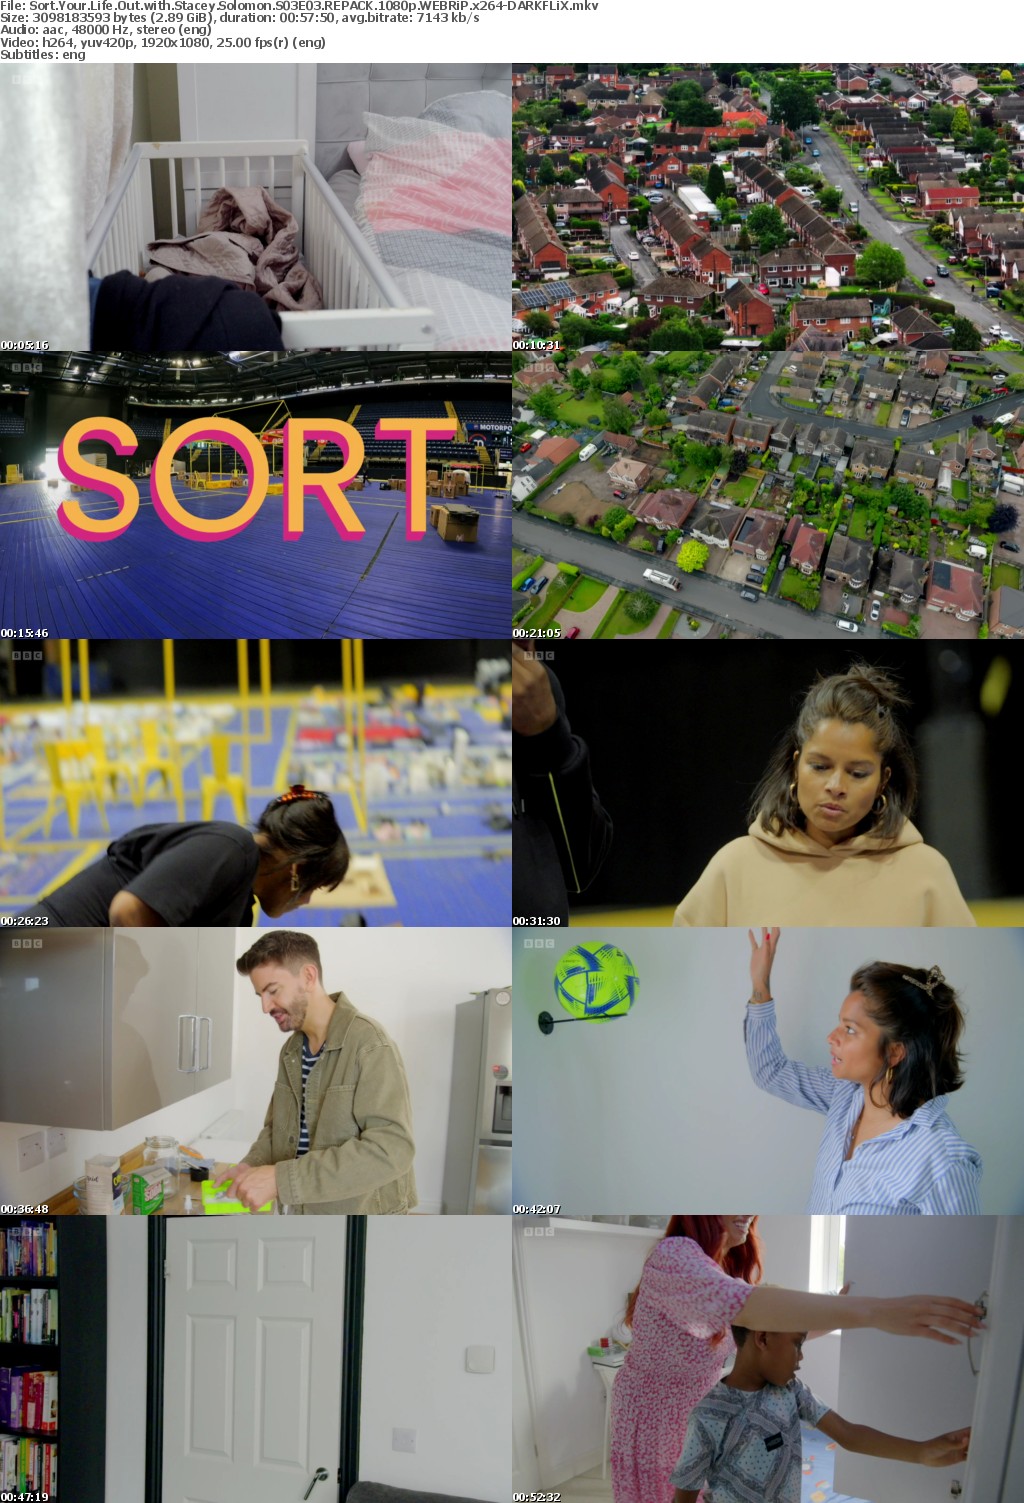 Sort Your Life Out with Stacey Solomon S03E03 REPACK 1080p WEBRiP x264-DARKFLiX